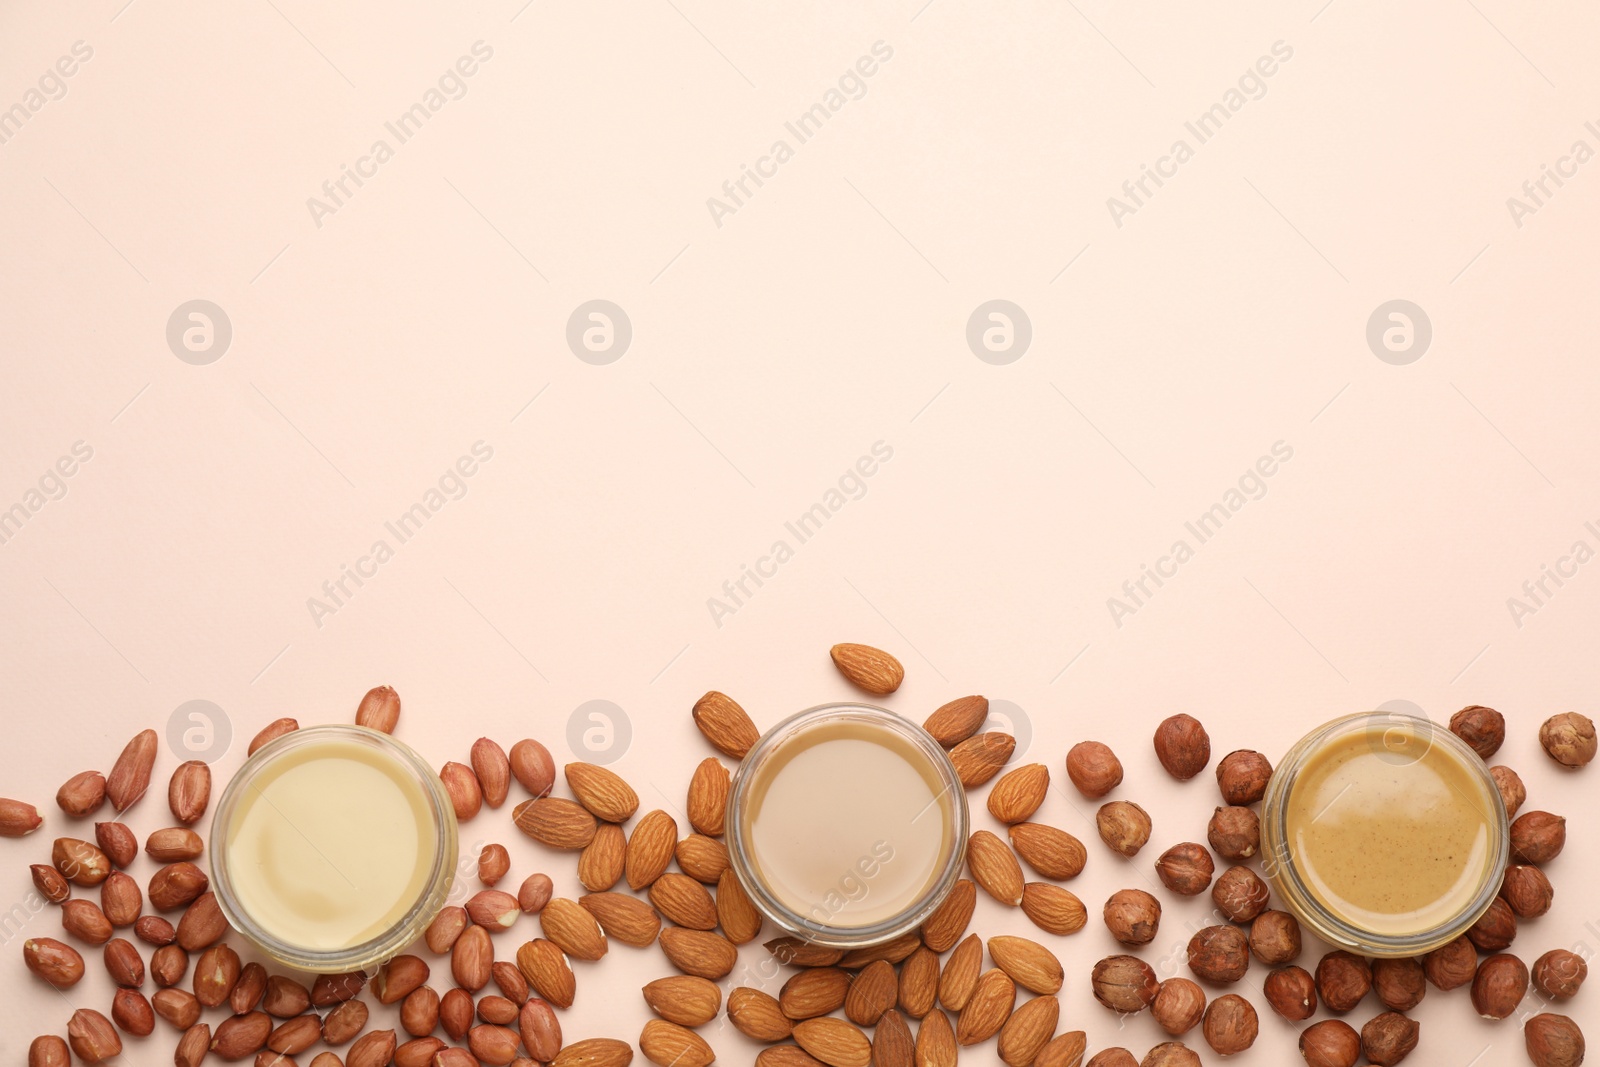 Photo of Different types of delicious nut butters and ingredients on beige background, flat lay. Space for text